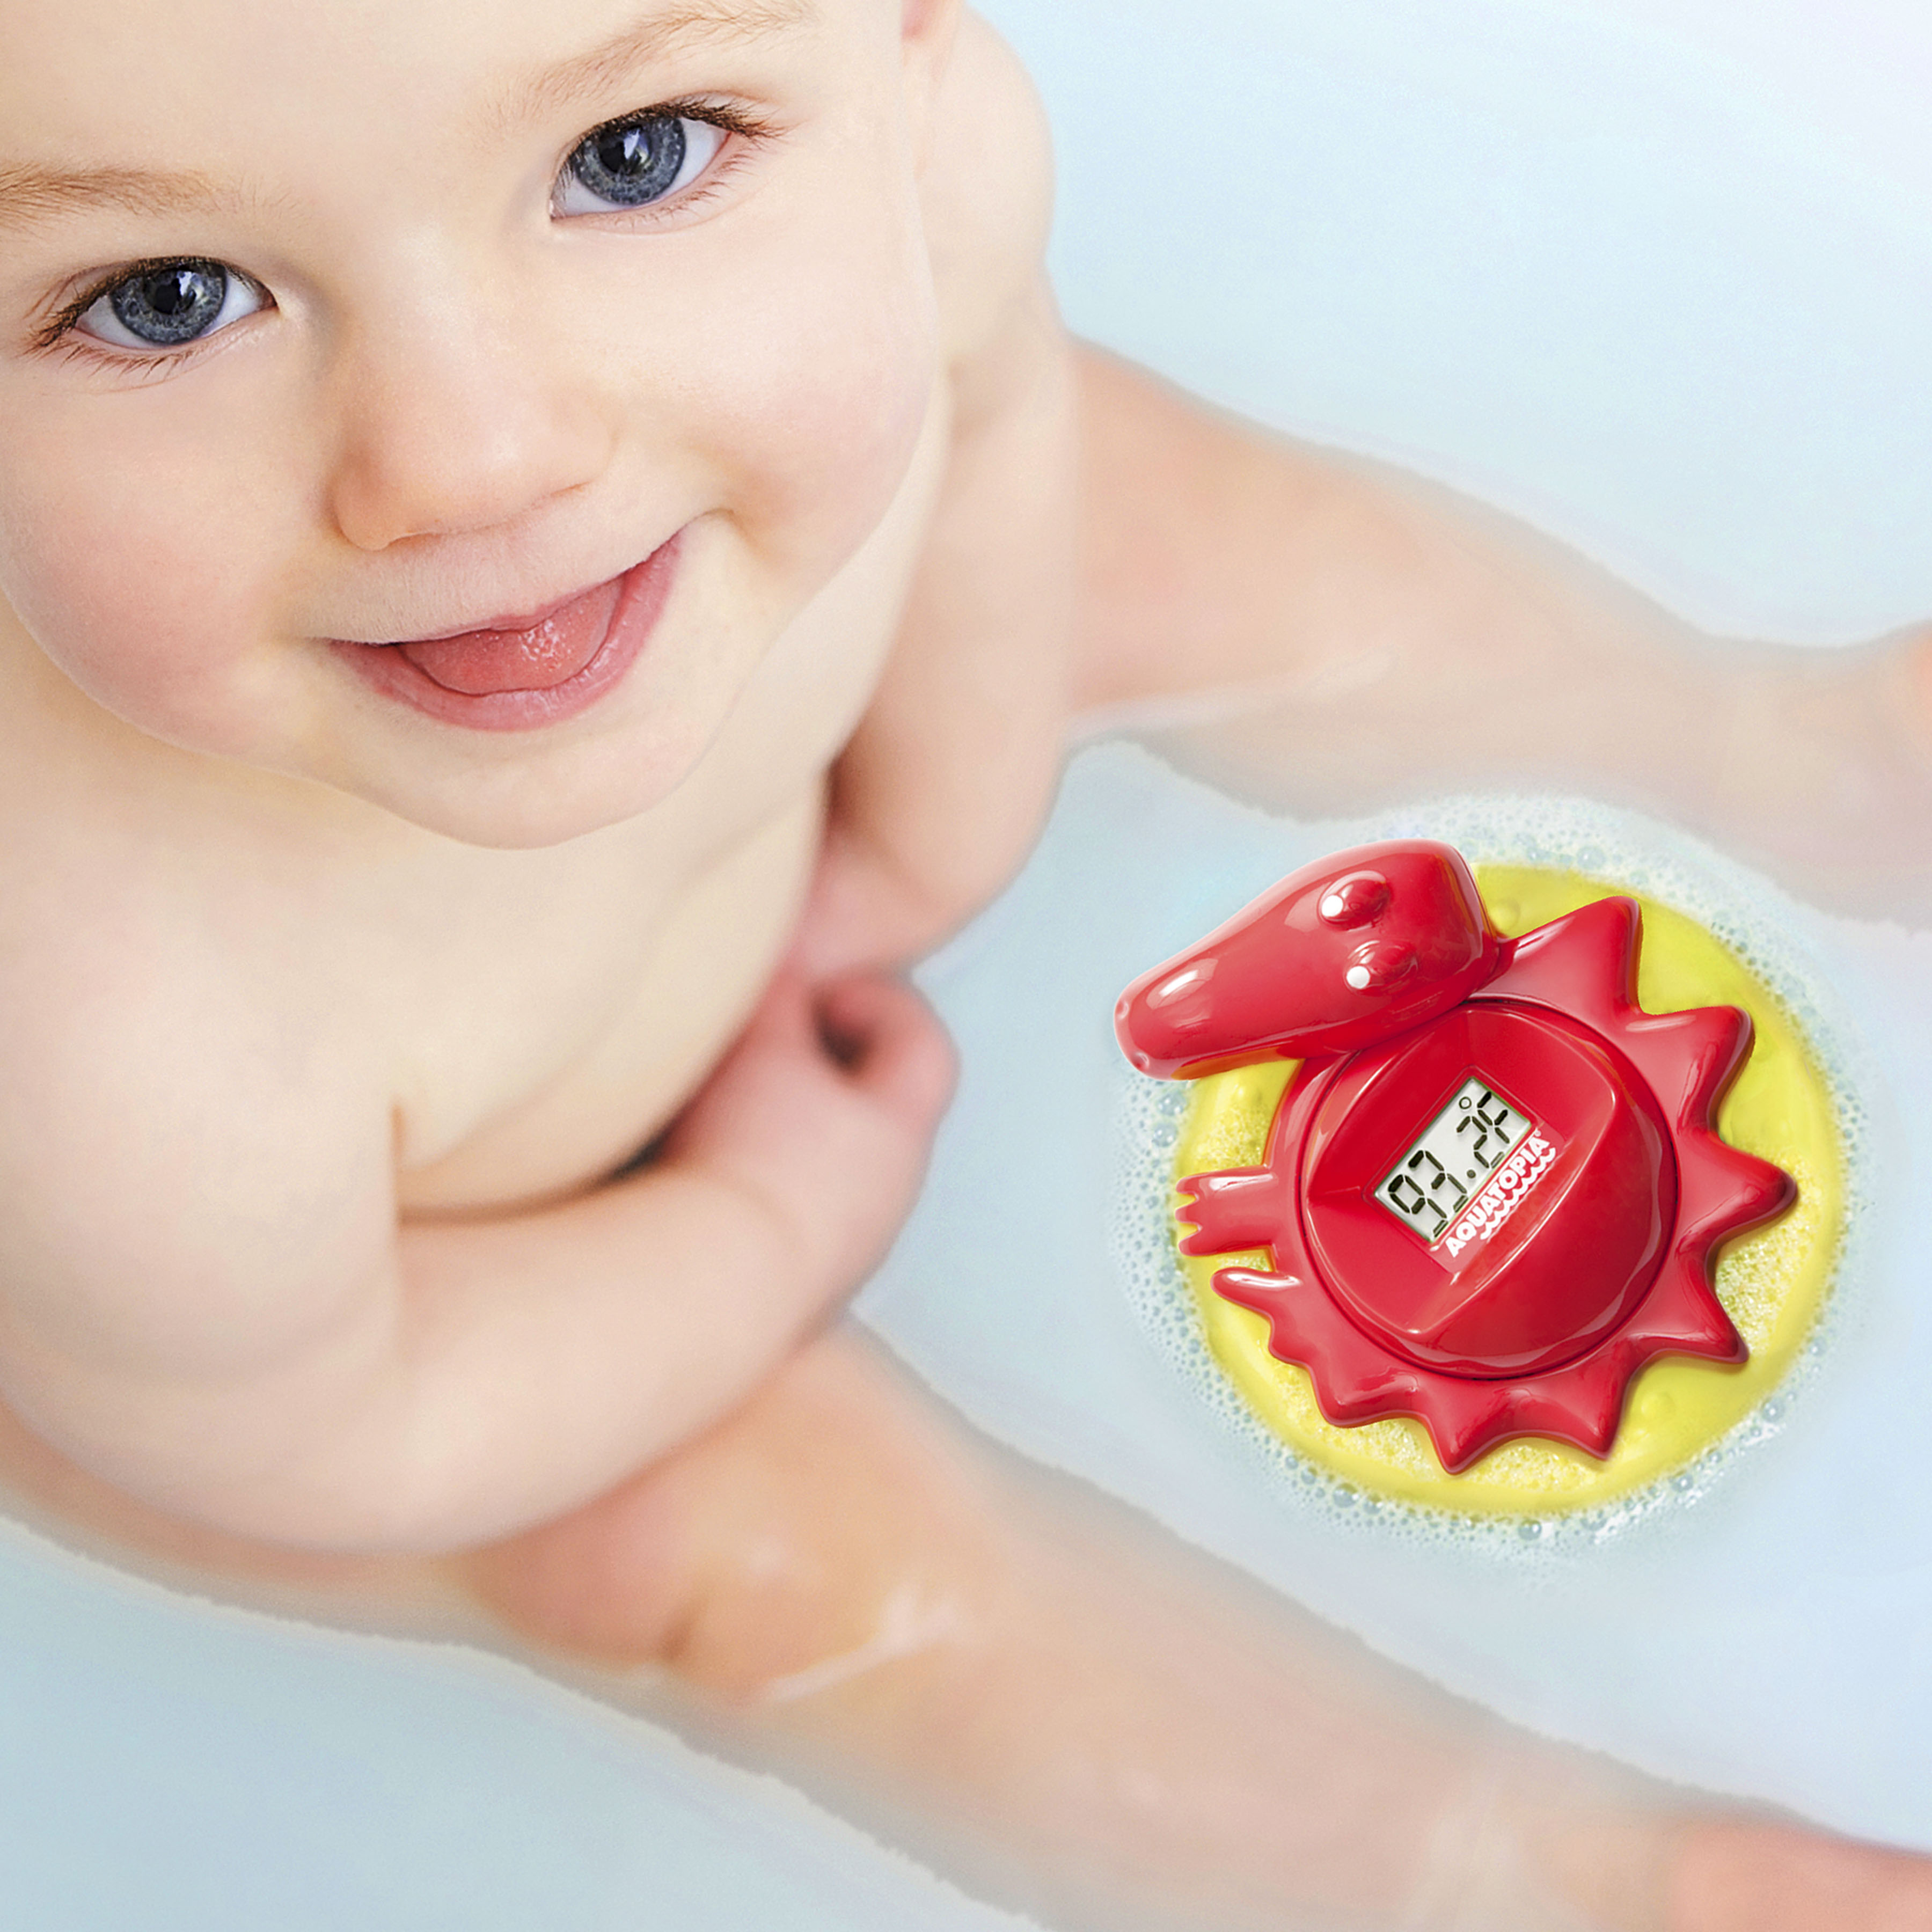 Aquatopia Safety Bath Thermometer with Digital Audible Alarm, Red - image 3 of 6